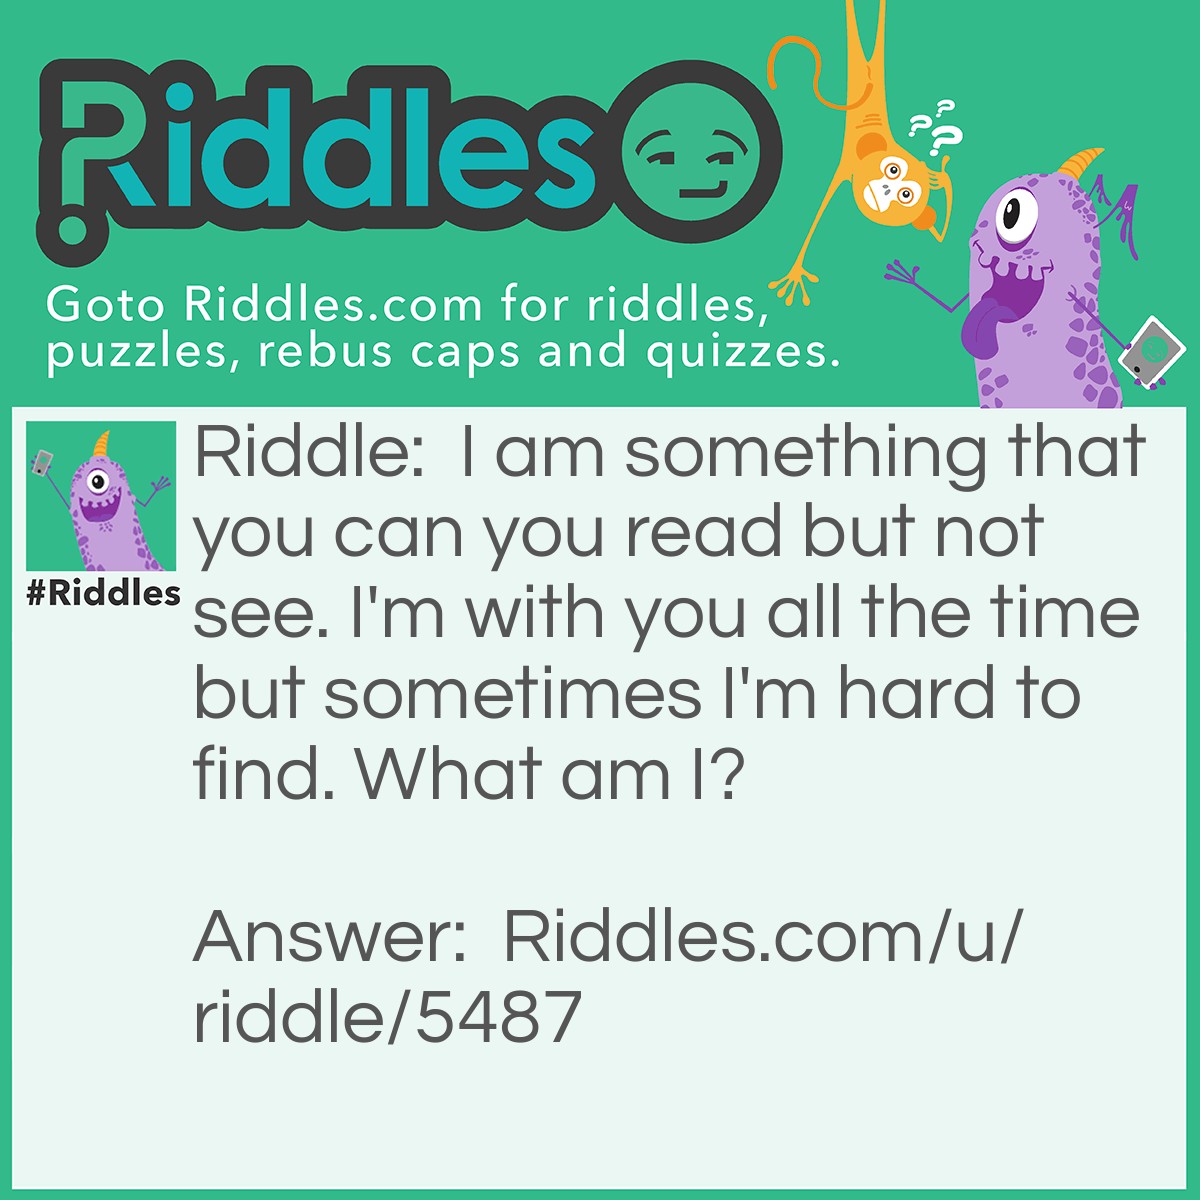 Riddle: I am something that you can you read but not see. I'm with you all the time but sometimes I'm hard to find. What am I? Answer: Time.